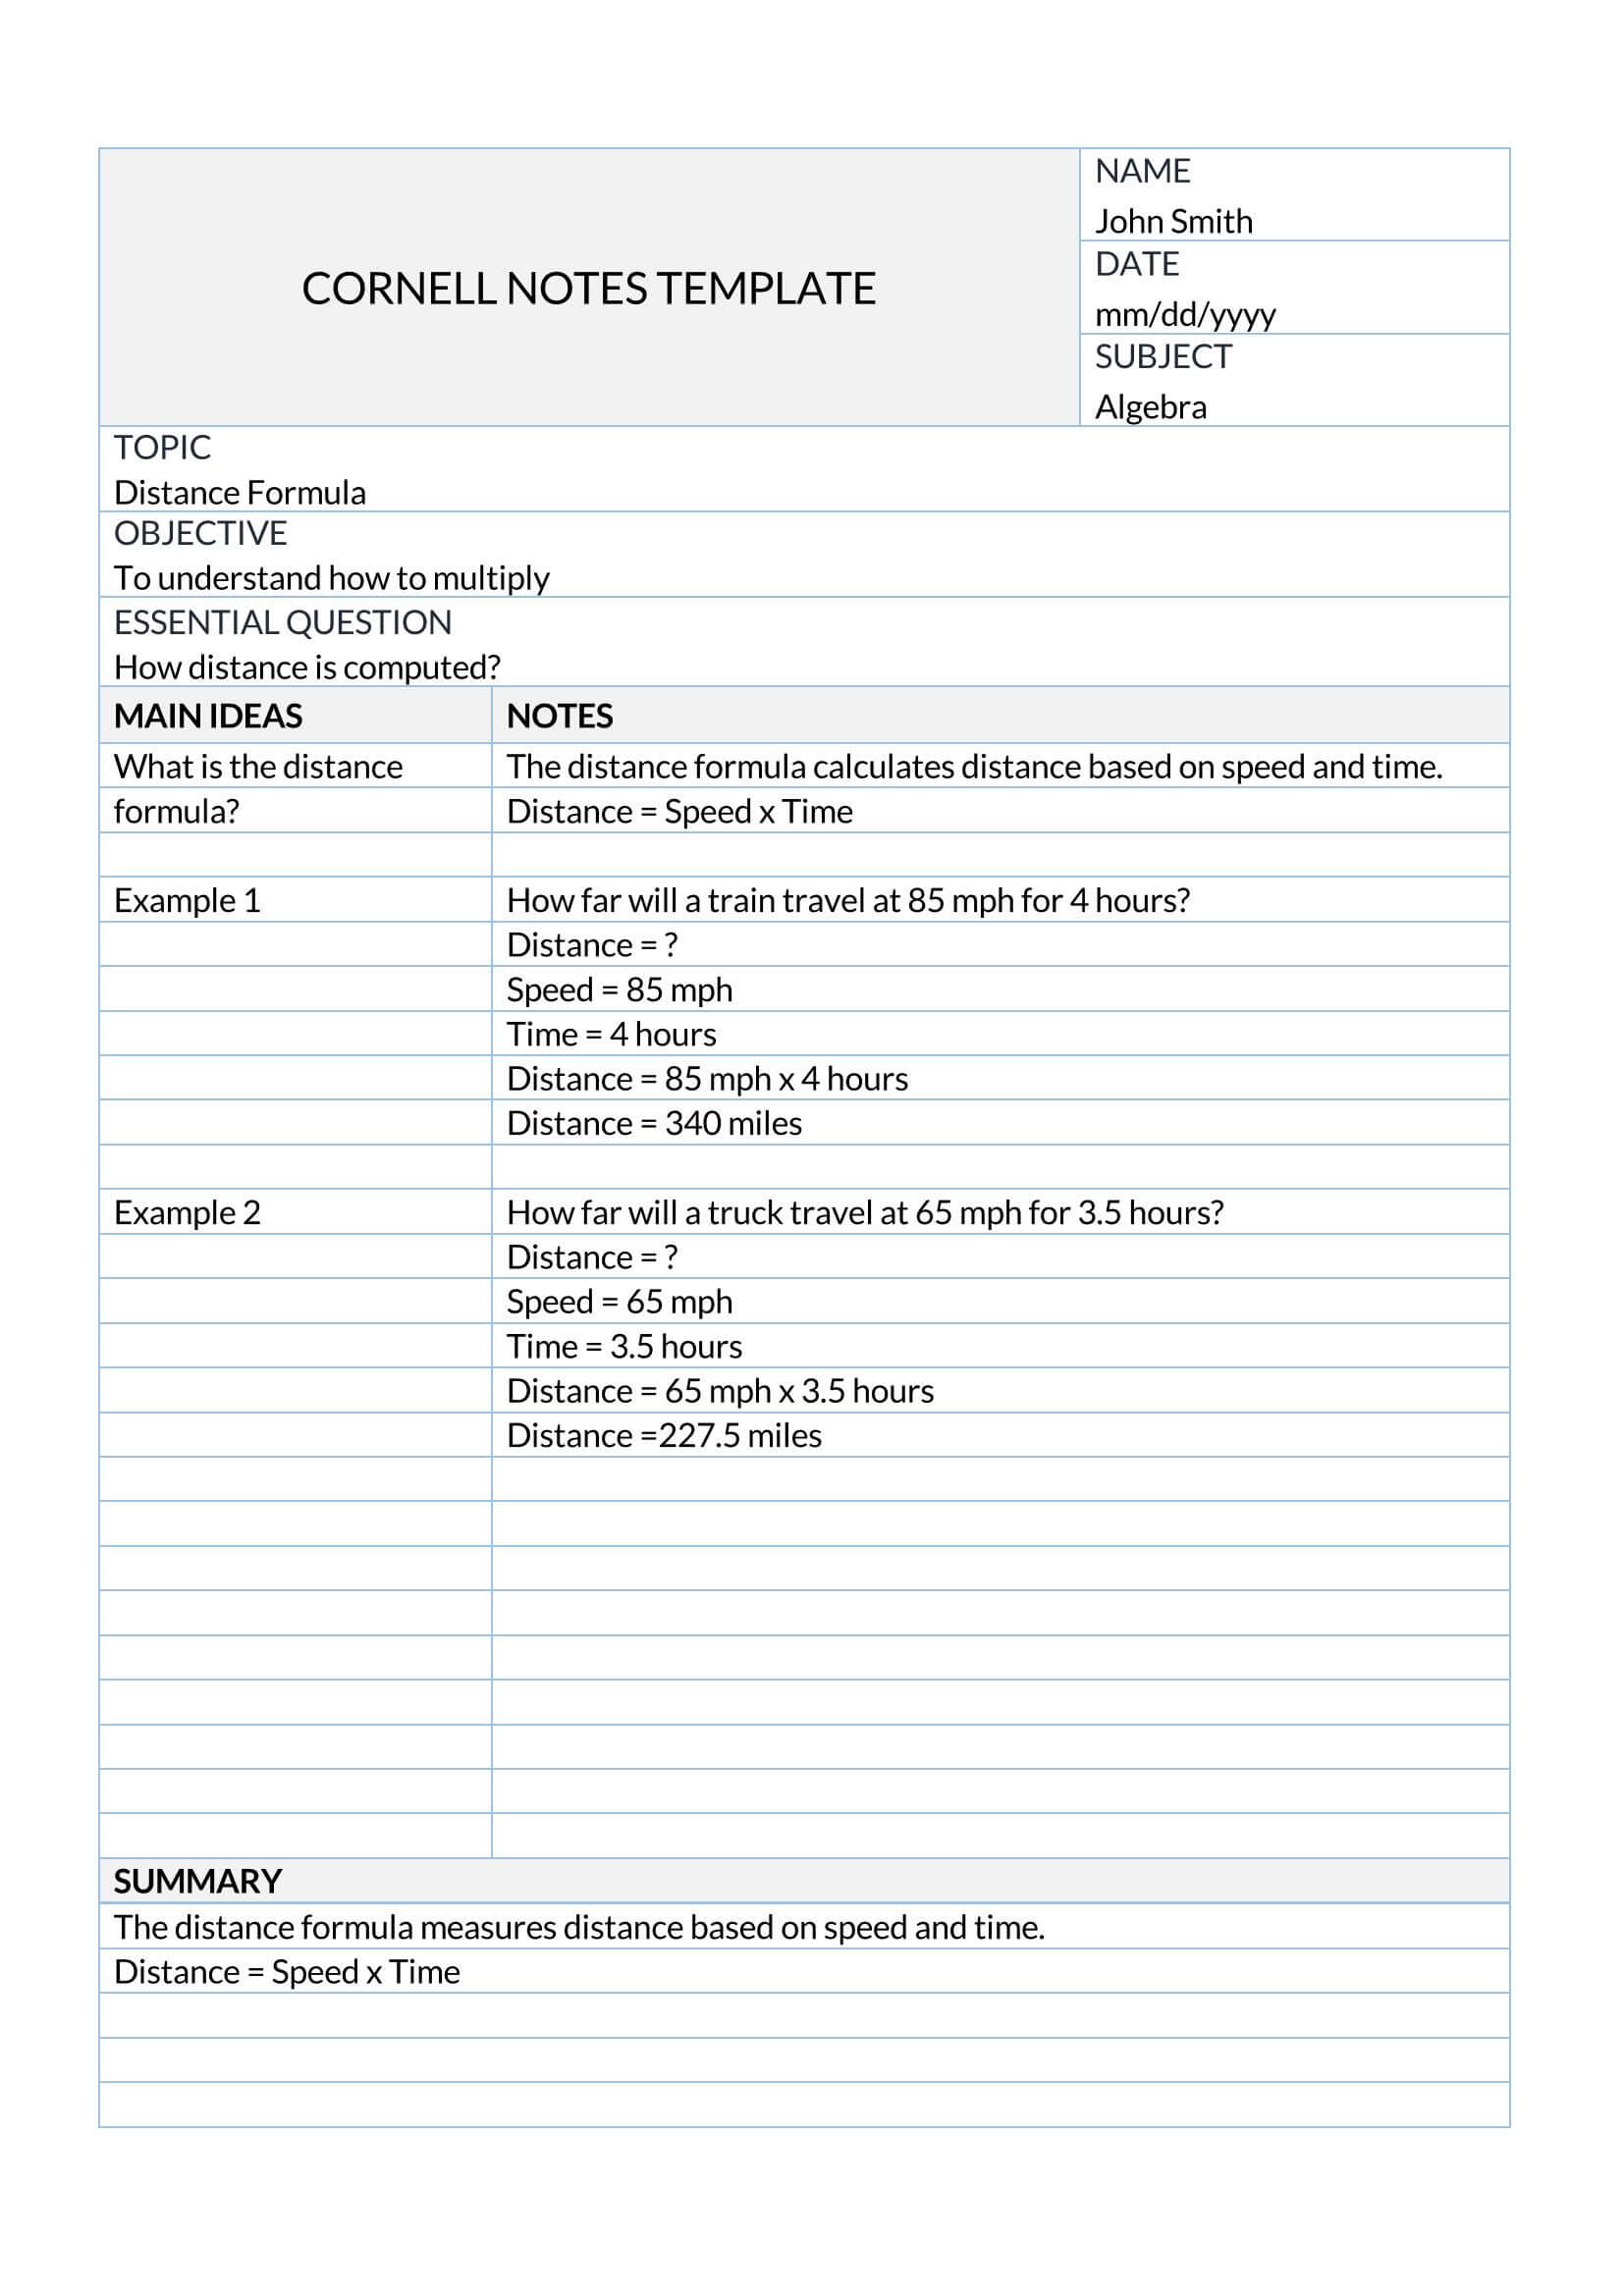 Printable Cornell Note Template Excel